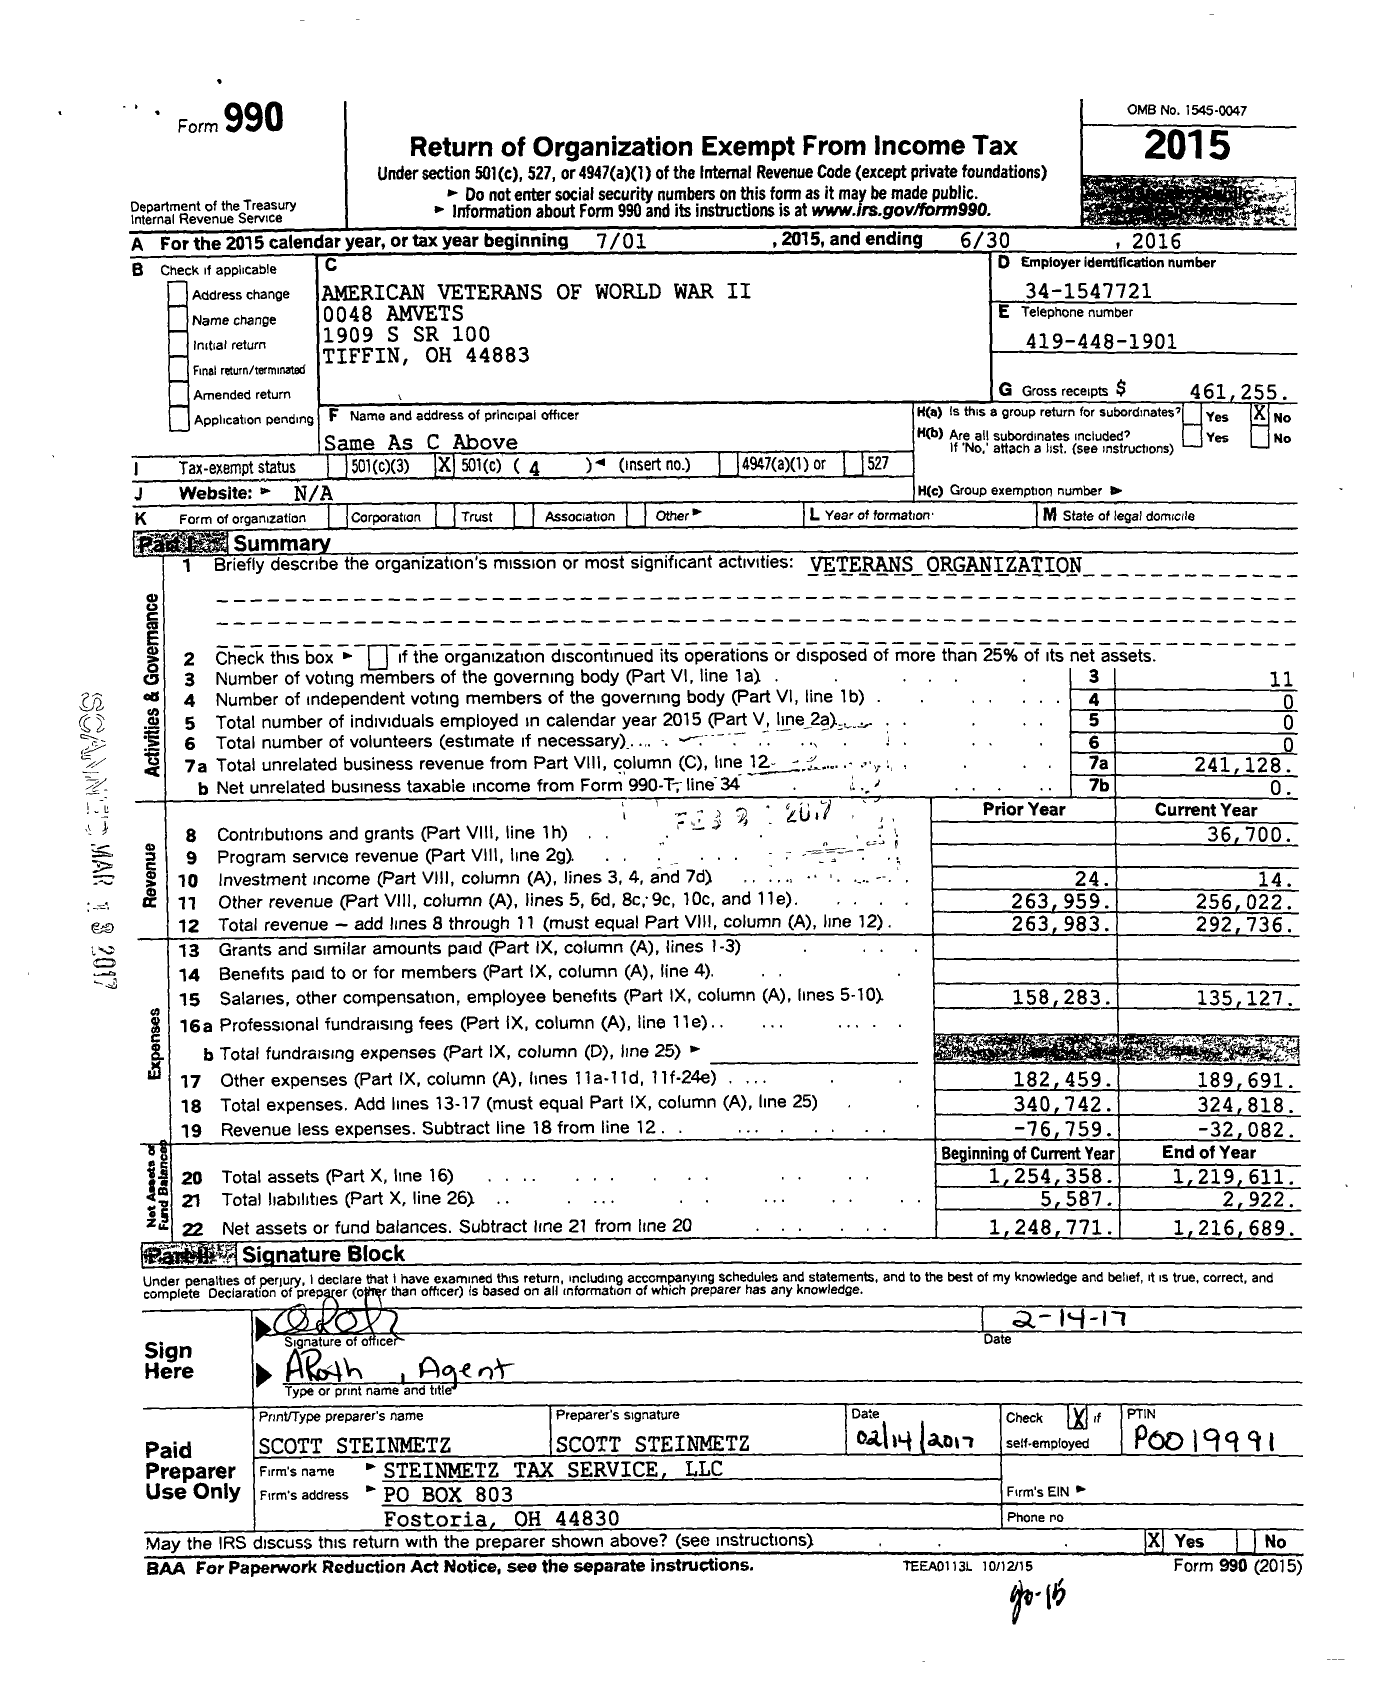 Image of first page of 2015 Form 990O for American Veterans of World War Ii 0048 Amvets